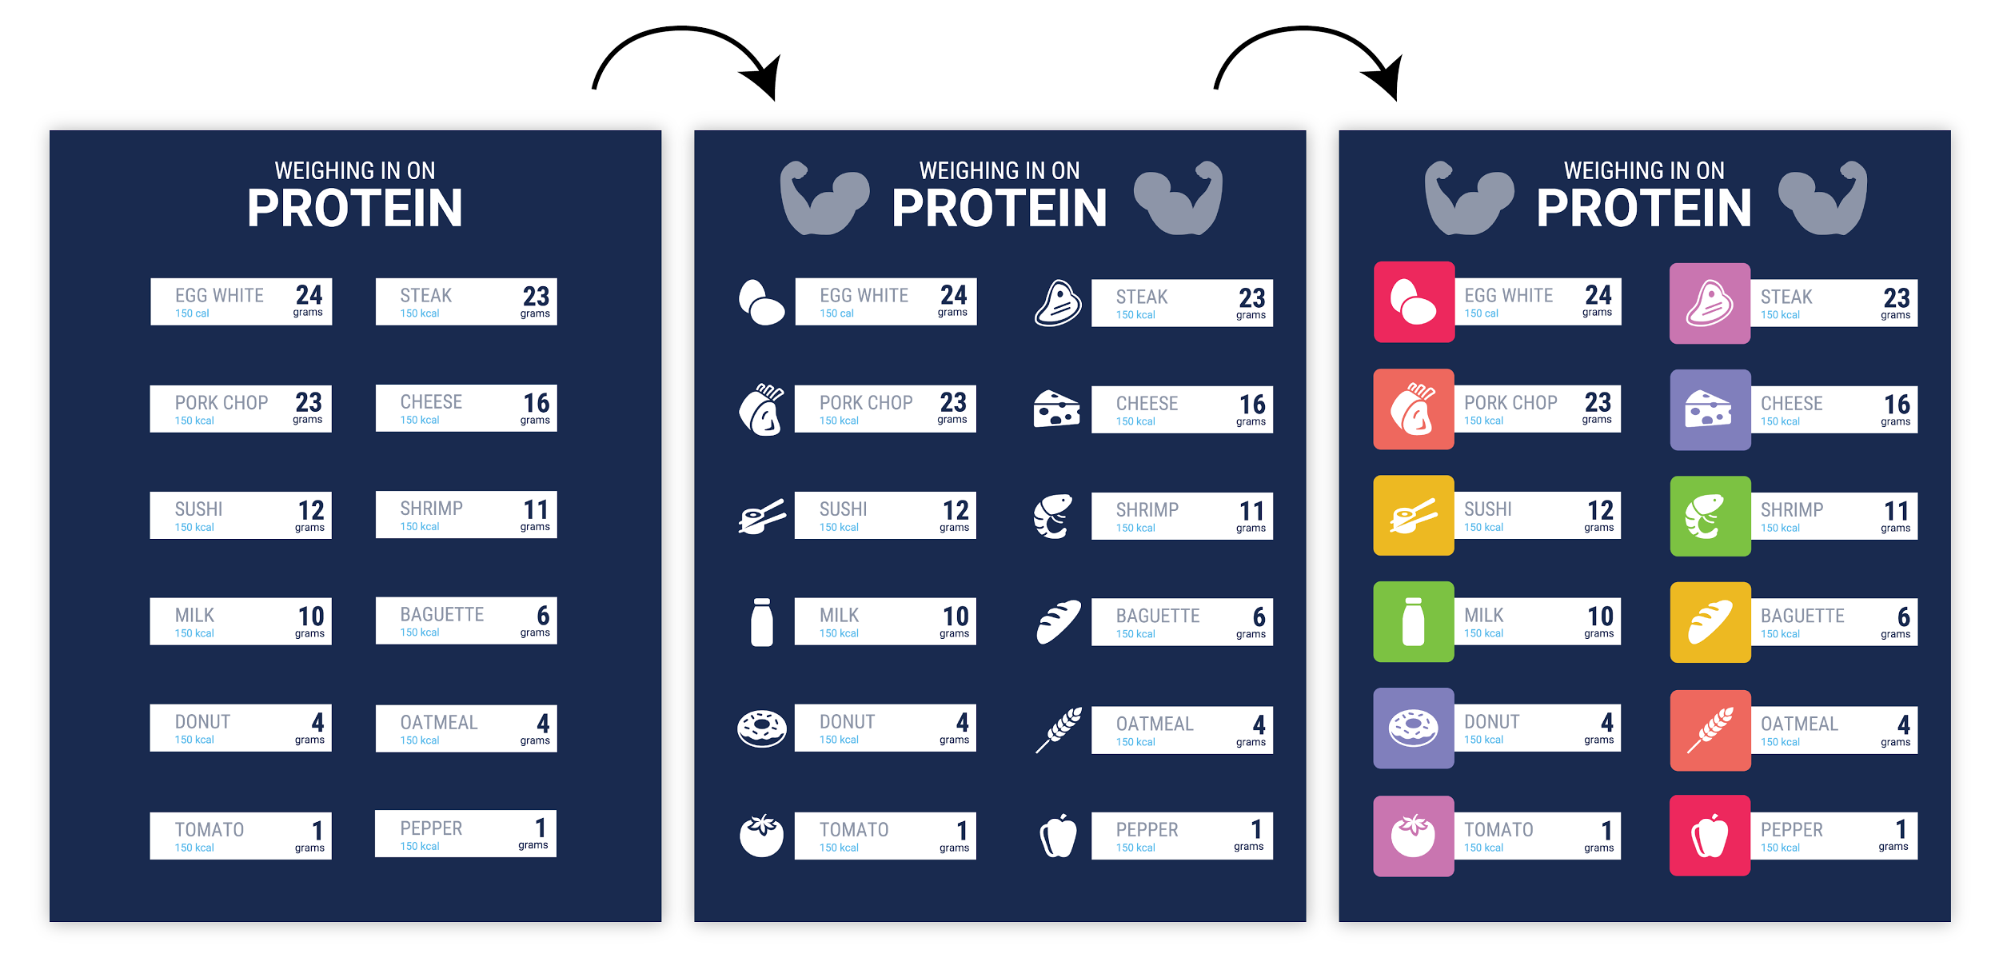 Comparing Protein
